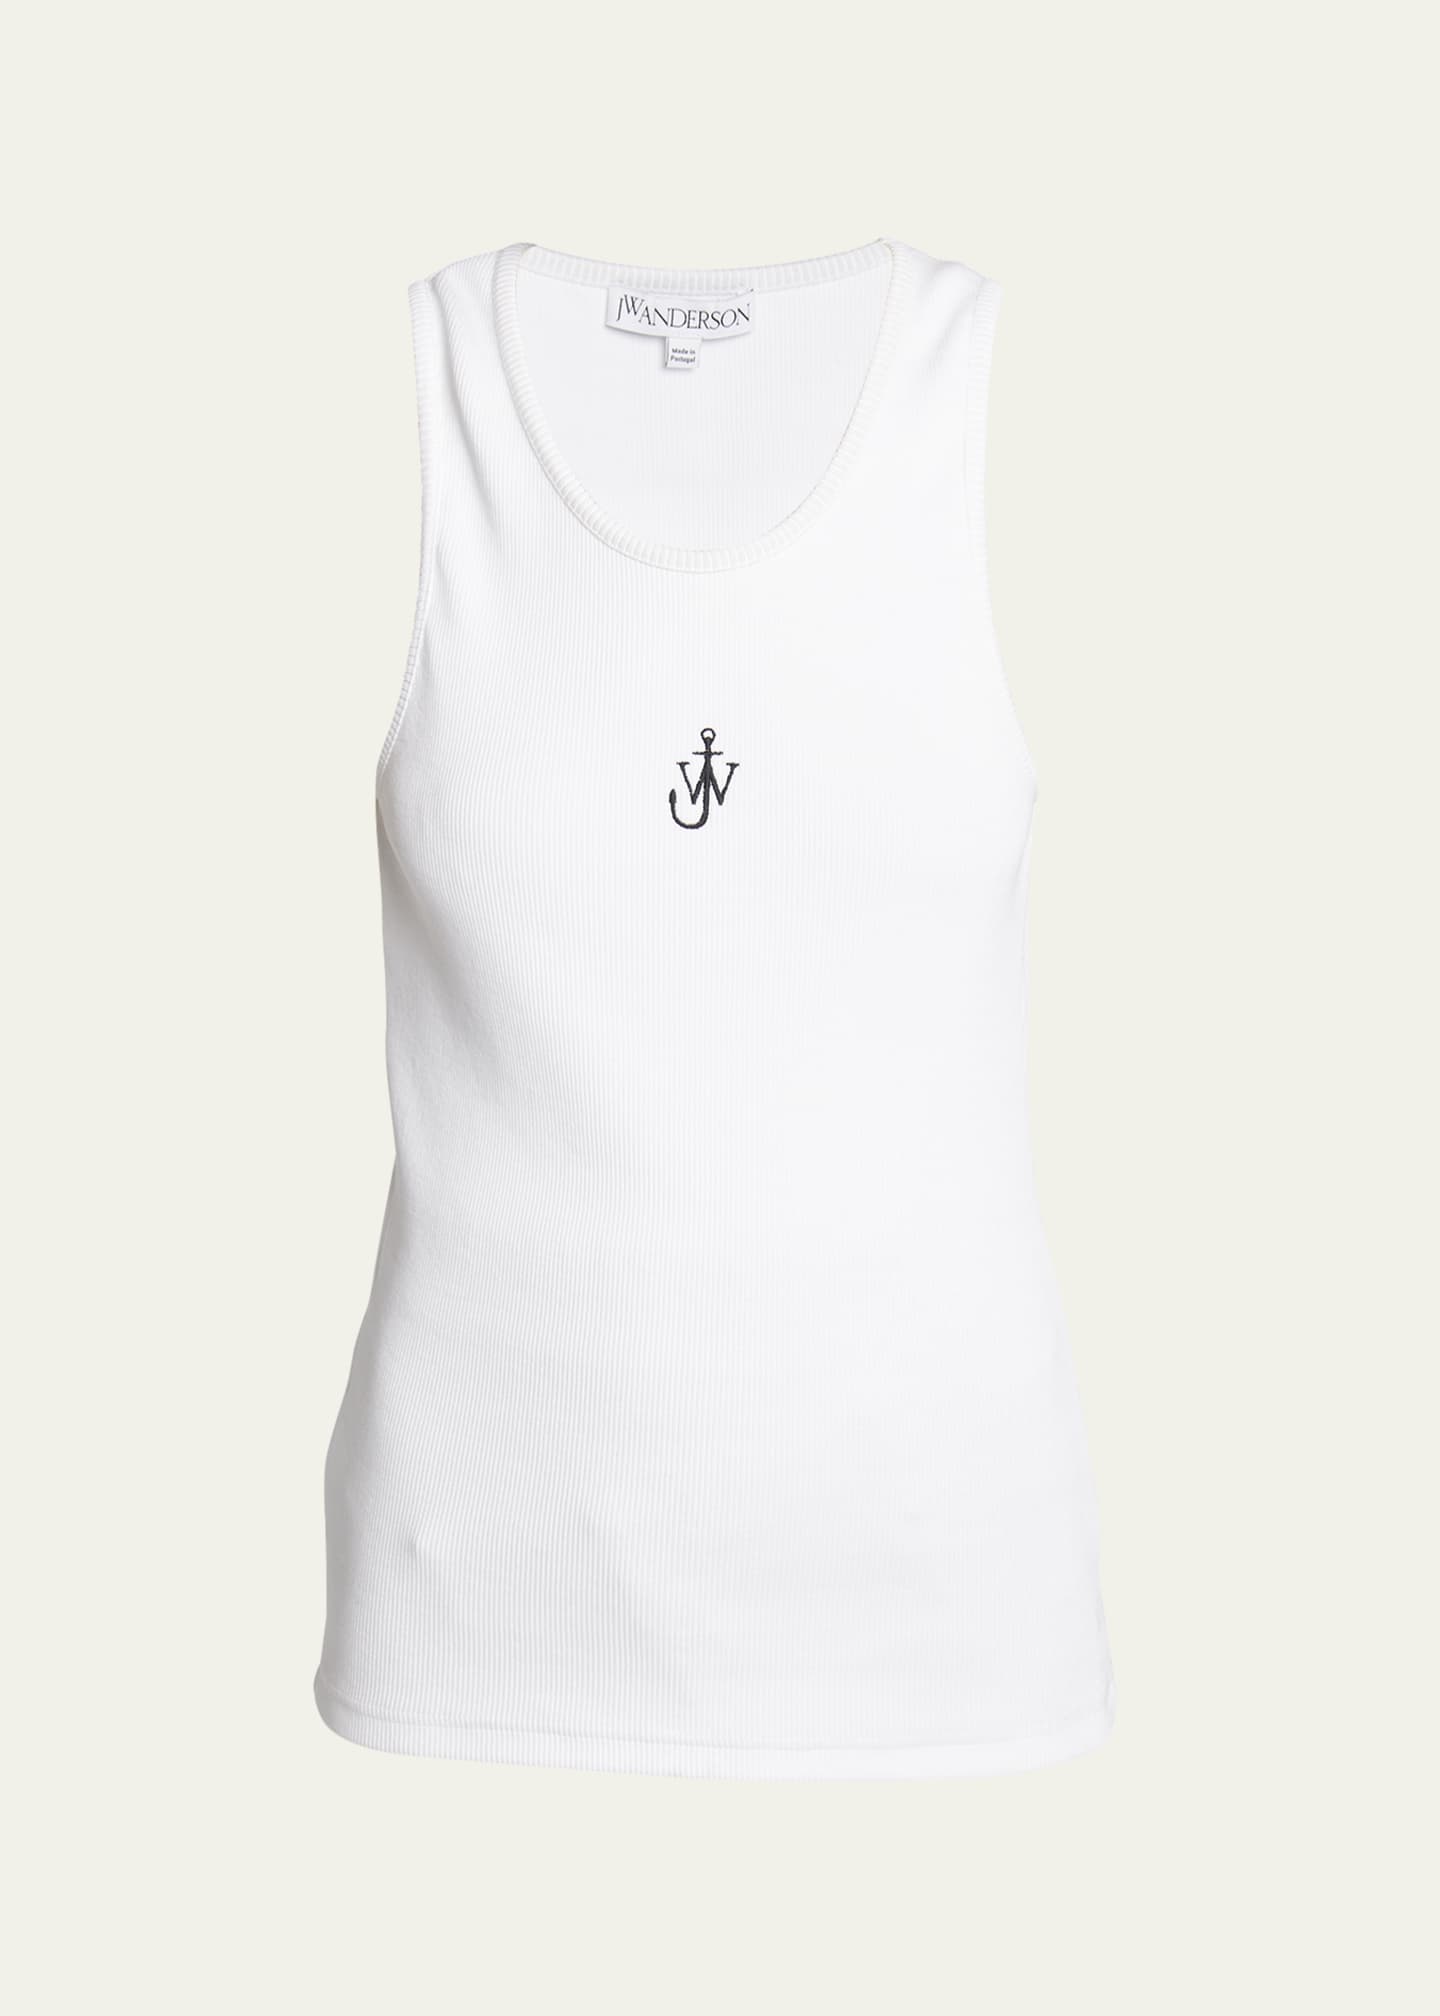 JW Anderson Anchor Logo Embroidered Tank Top - Bergdorf Goodman